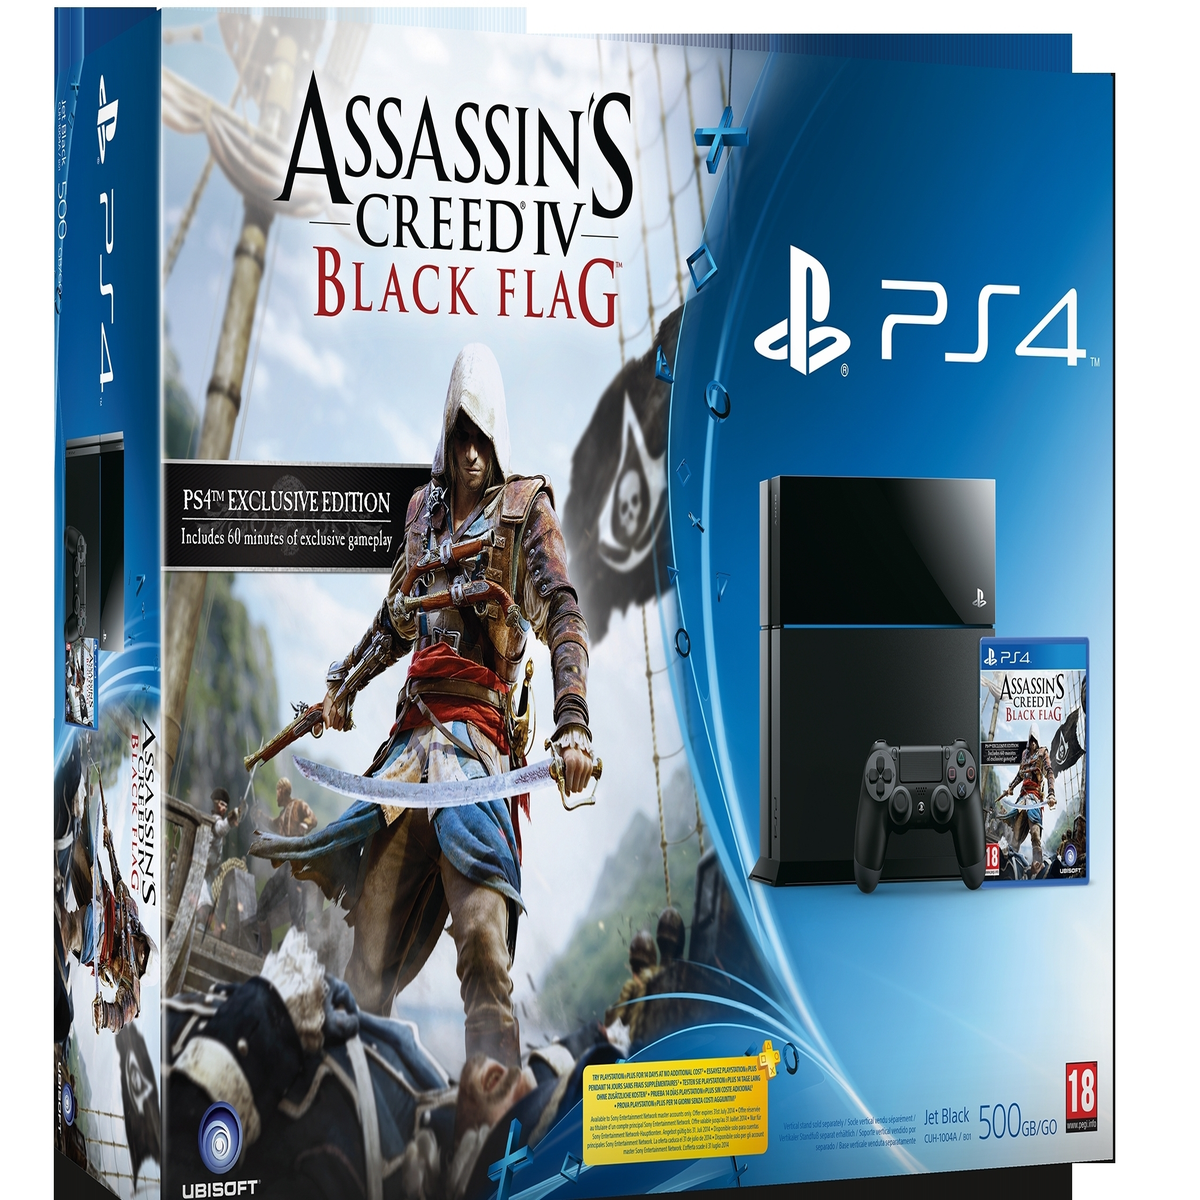 Assassin's Creed 4 PS4 announced |